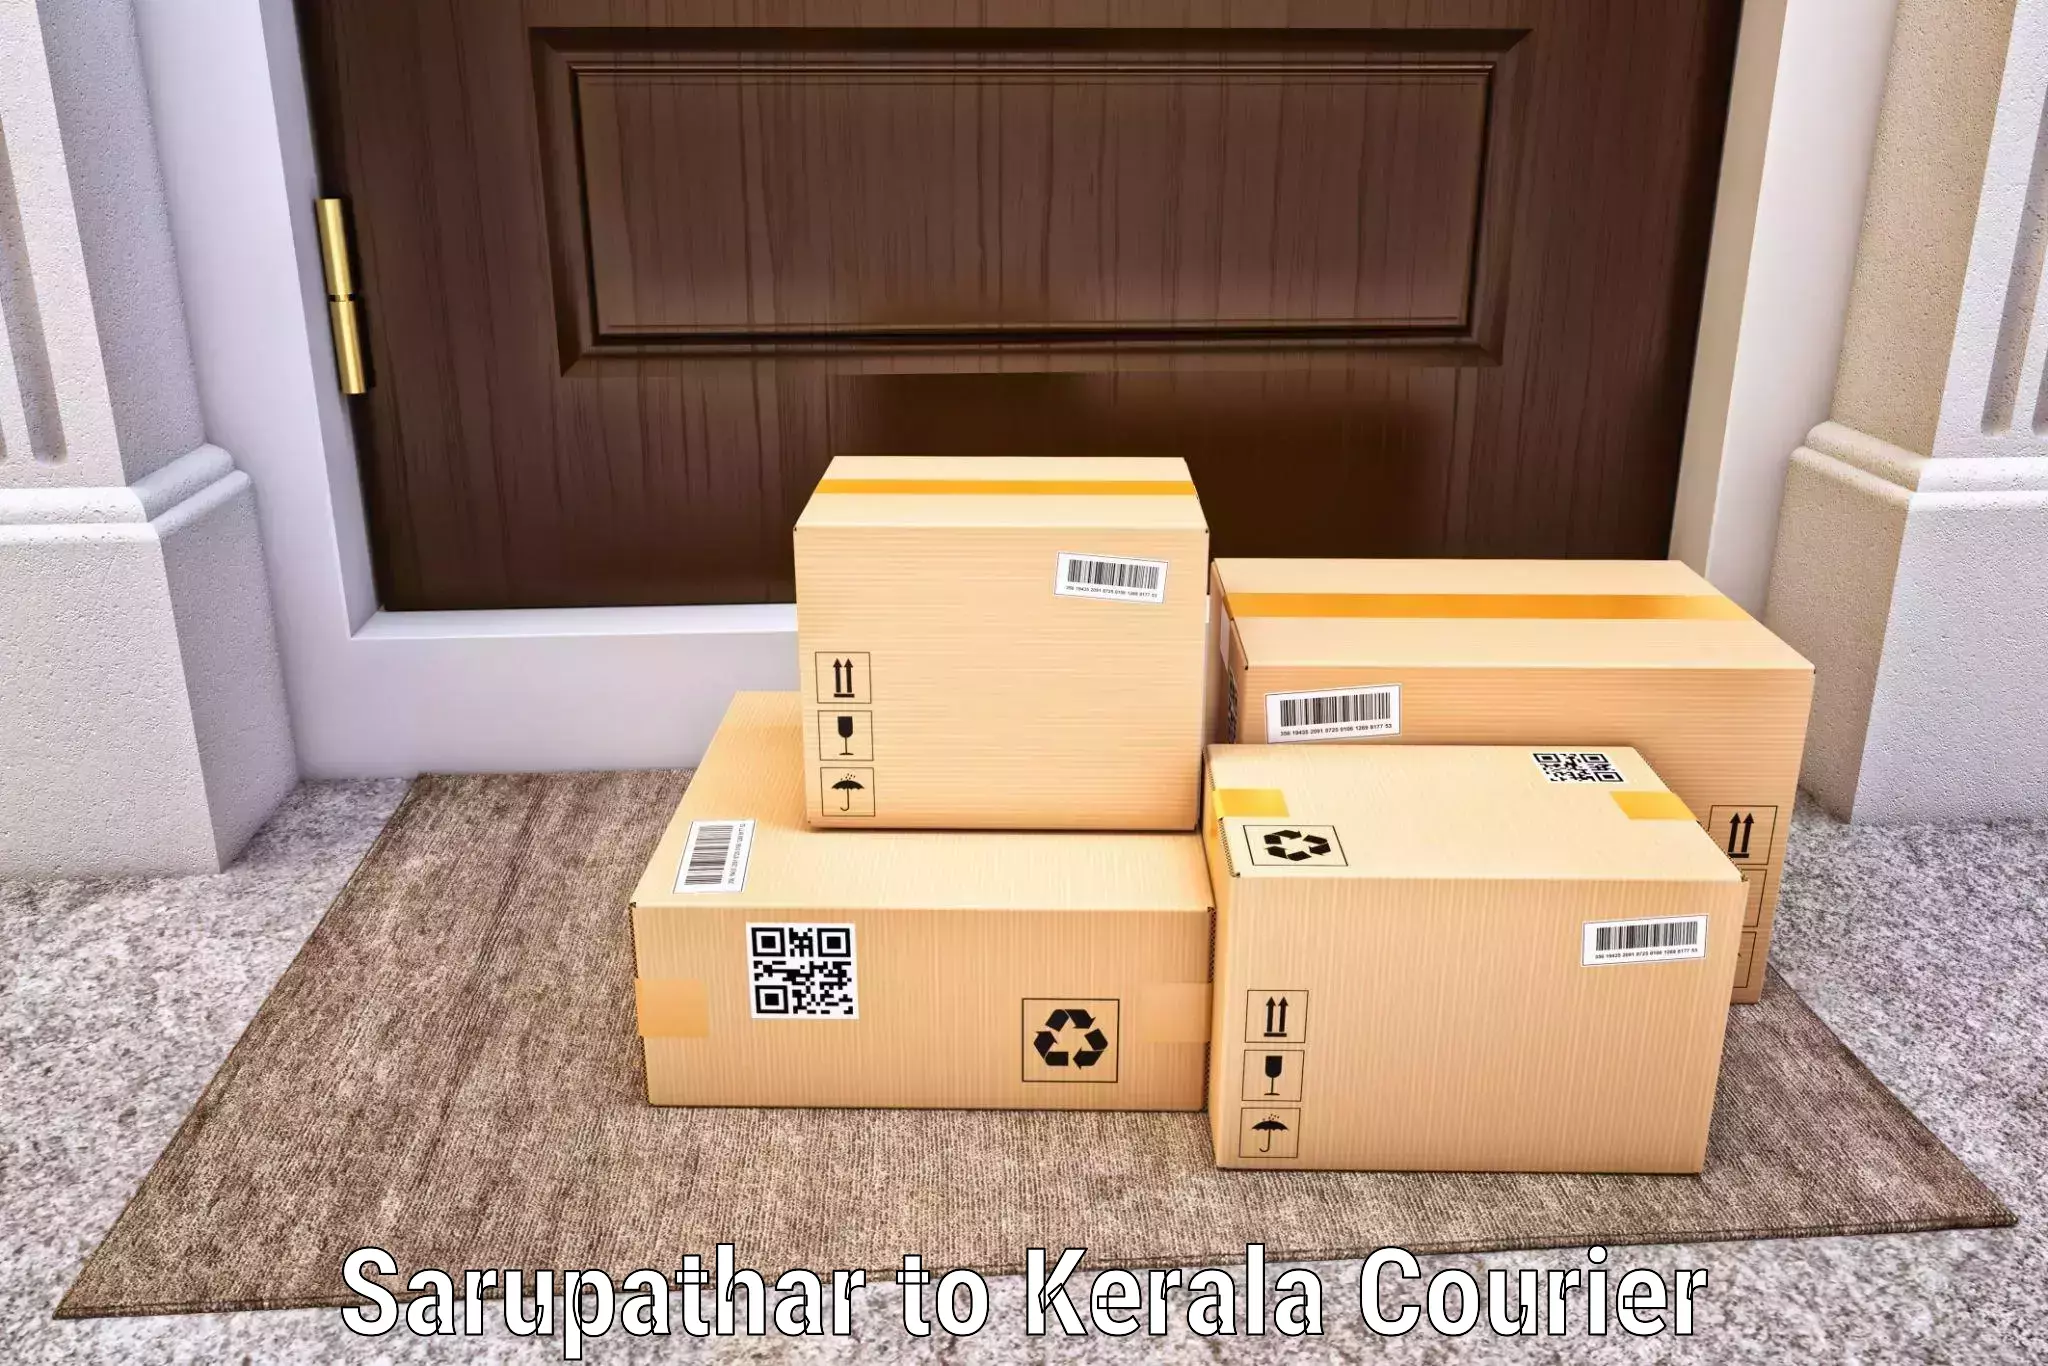 Round-the-clock parcel delivery Sarupathar to Kerala